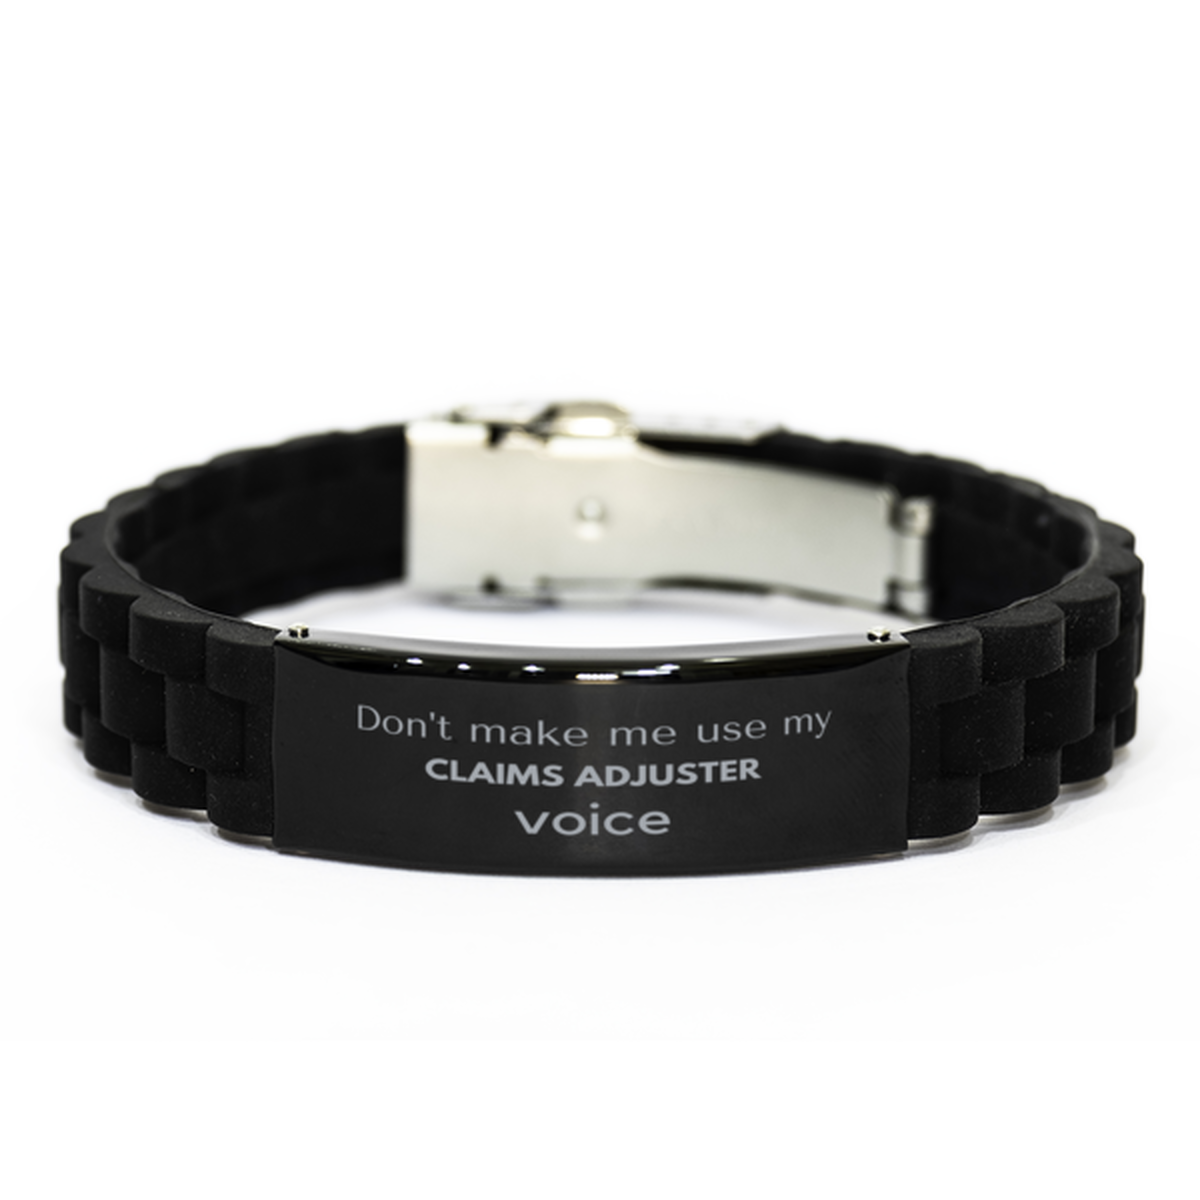 Don't make me use my Claims Adjuster voice, Sarcasm Claims Adjuster Gifts, Christmas Claims Adjuster Black Glidelock Clasp Bracelet Birthday Unique Gifts For Claims Adjuster Coworkers, Men, Women, Colleague, Friends